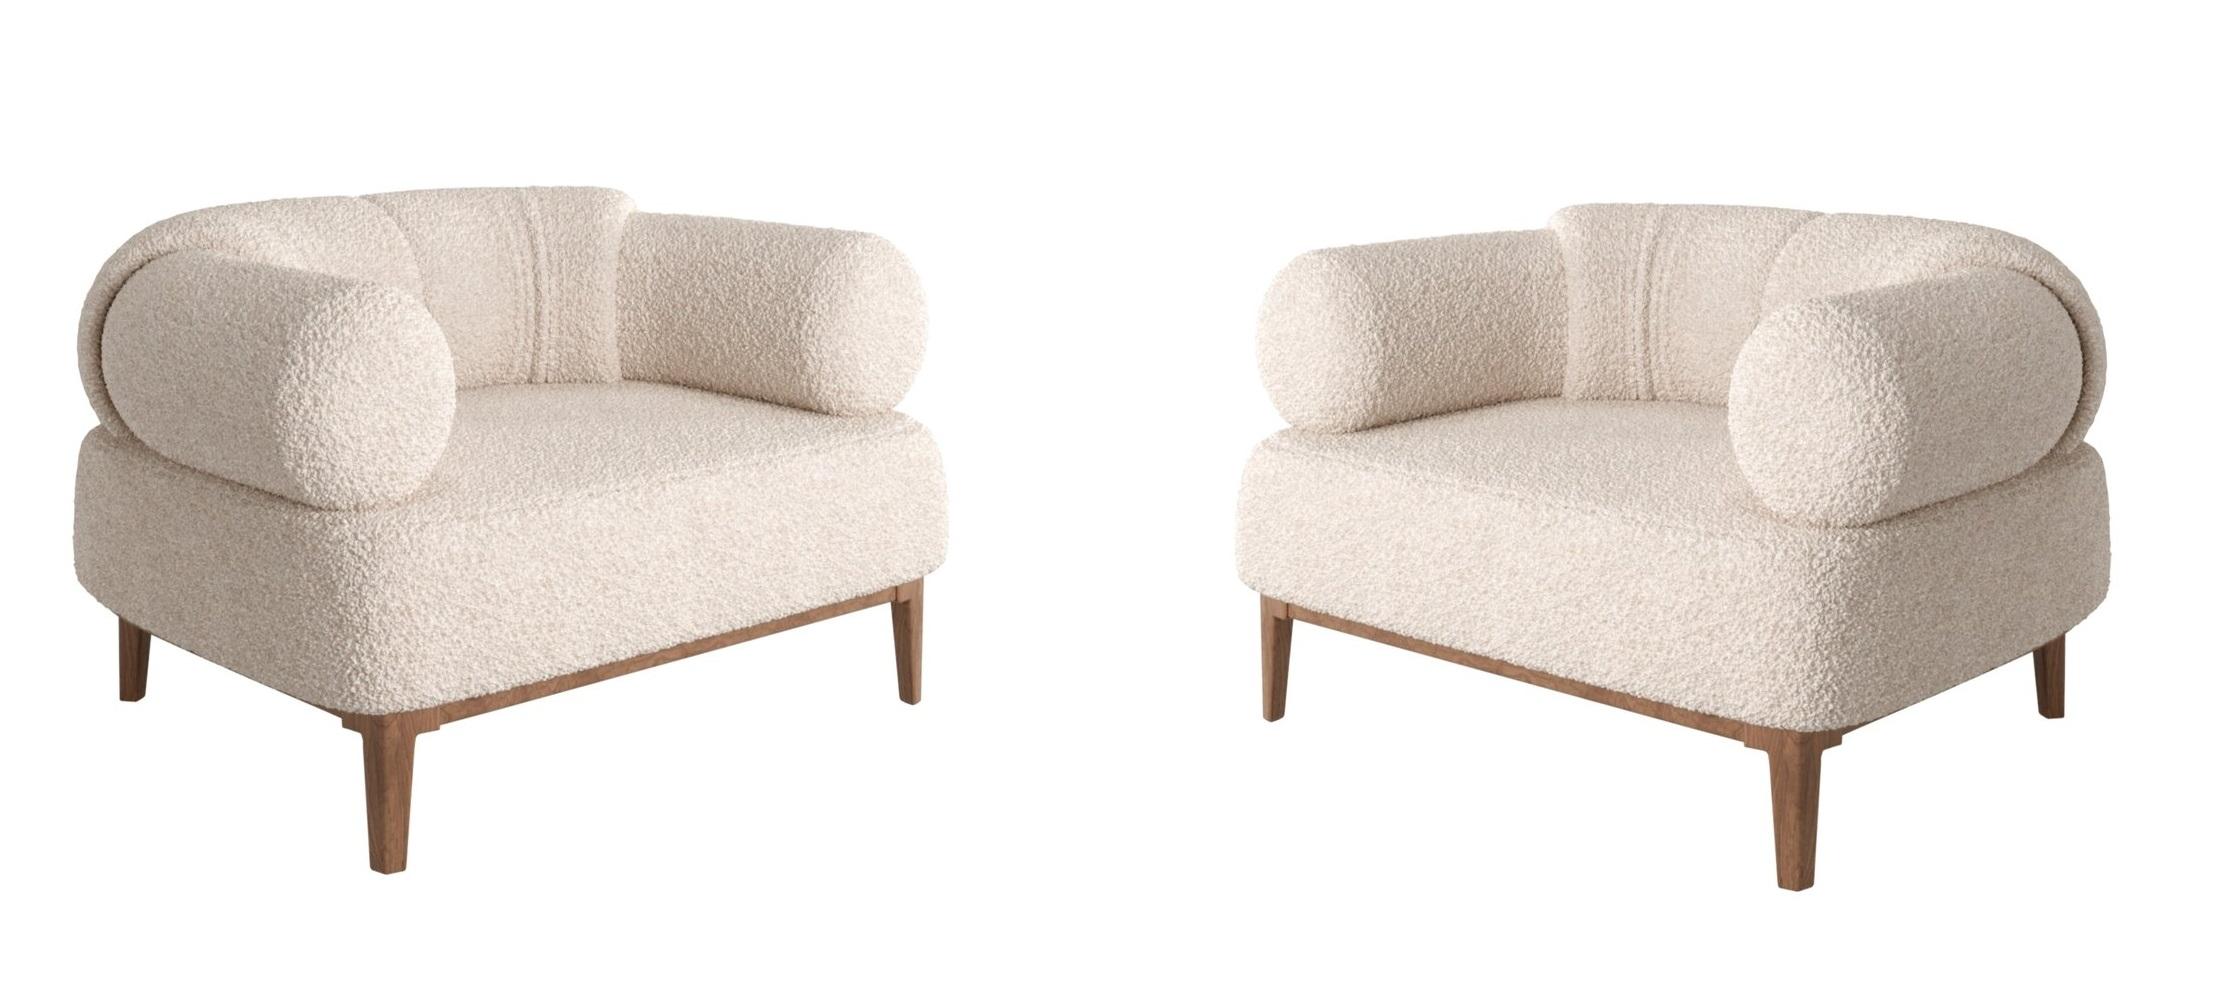 Contemporary Armchair Upholstered in Bouclé Fabric, Set of 2. For Sale